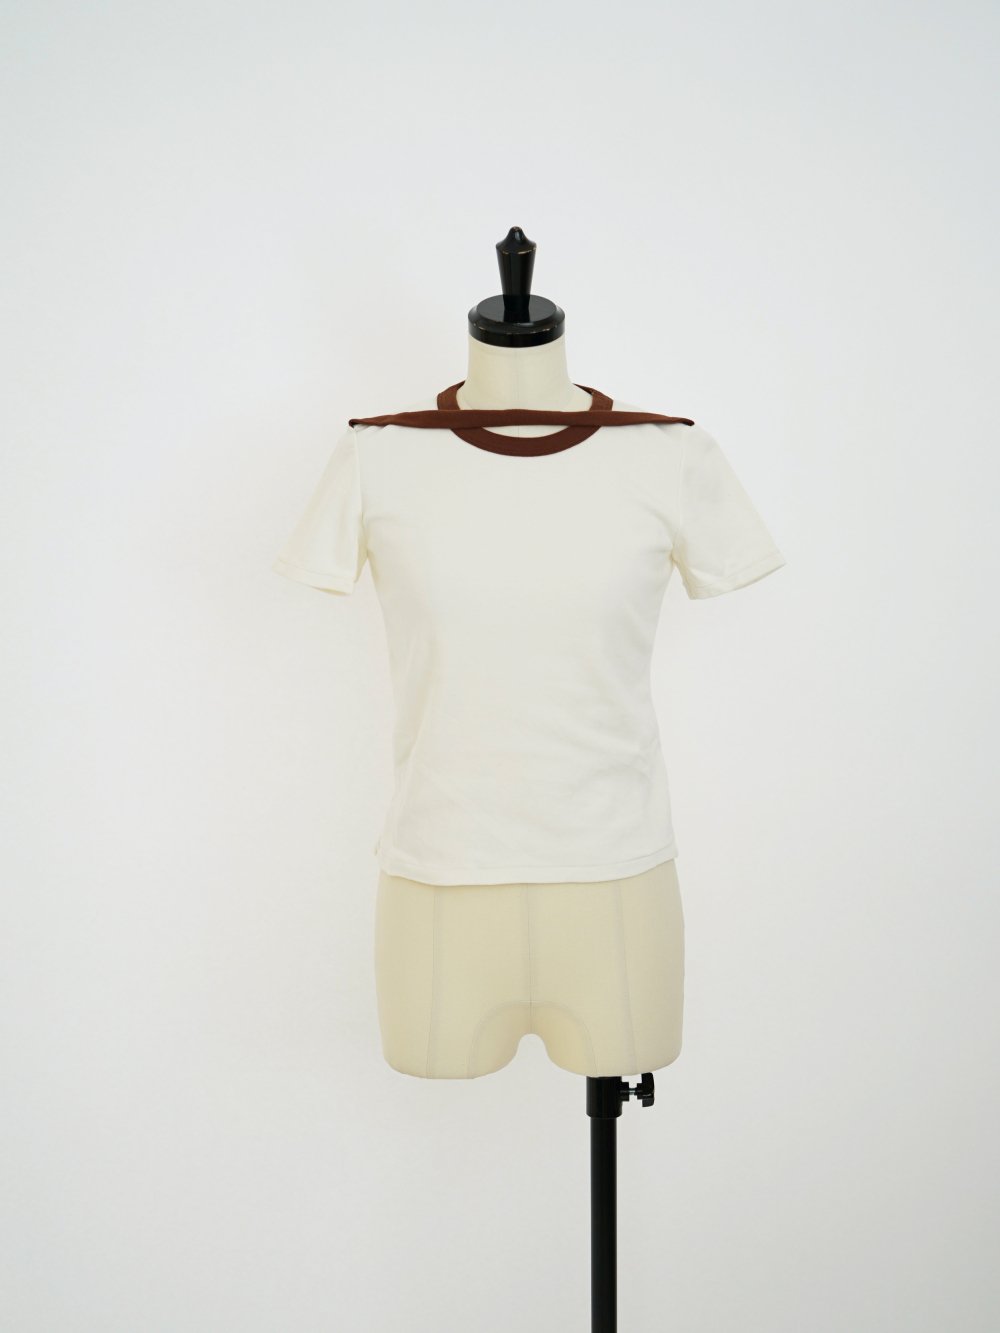 FUMIKA_UCHIDA TRIMMED DOUBLE-NECK TEE / OFFWHITE,BROWN